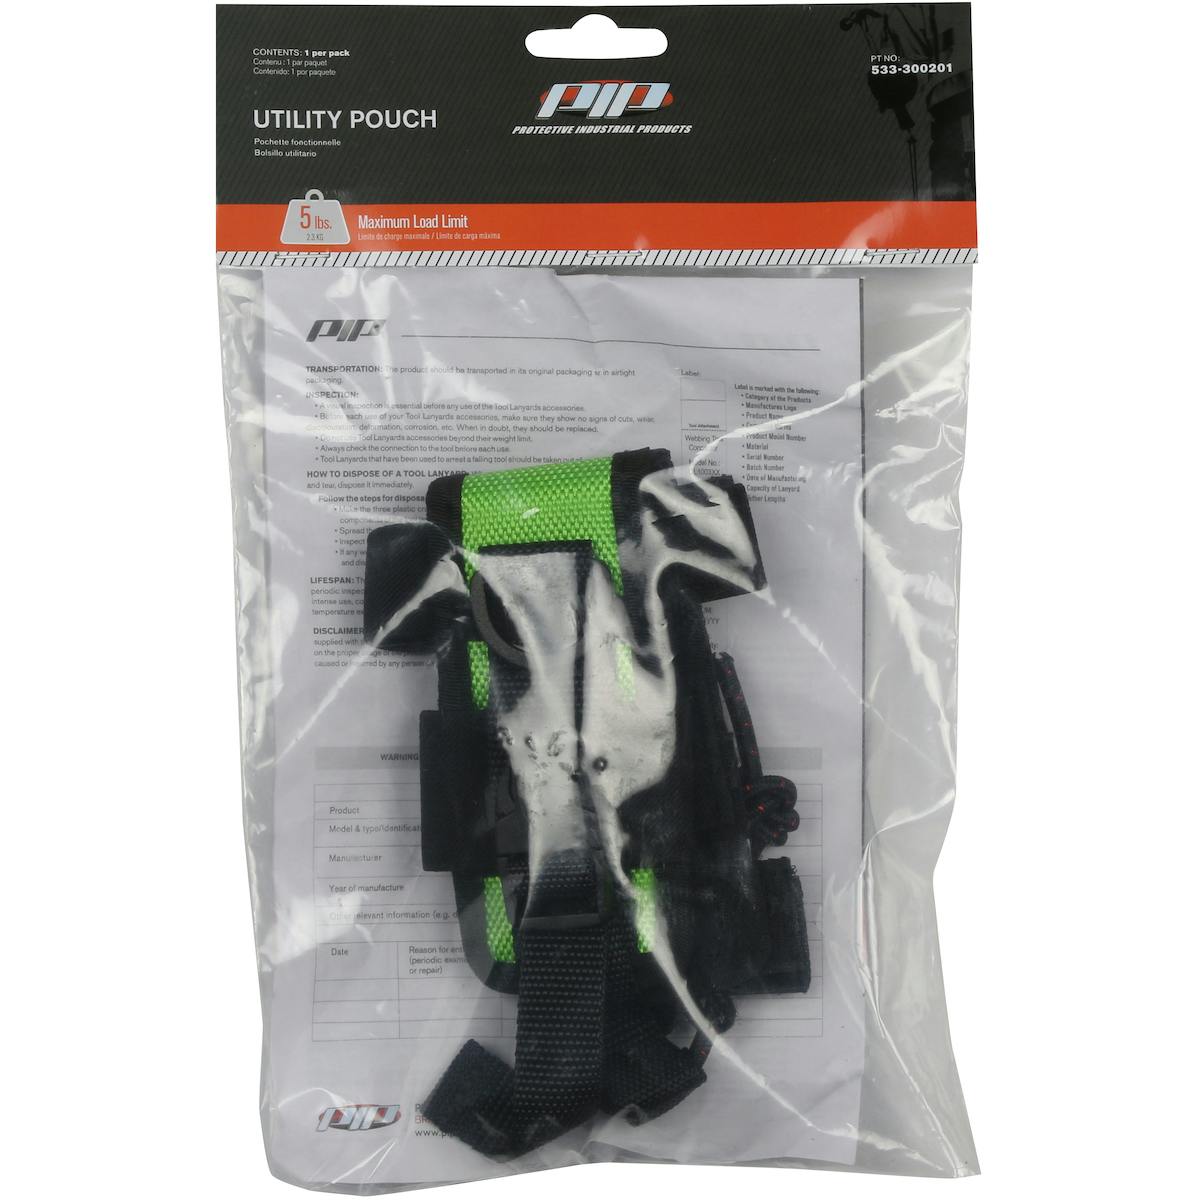 Tool Tethering Utility Pouch - 5 lbs. maximum load limit - Retail Packaged, Green (533-300201) - OS_0